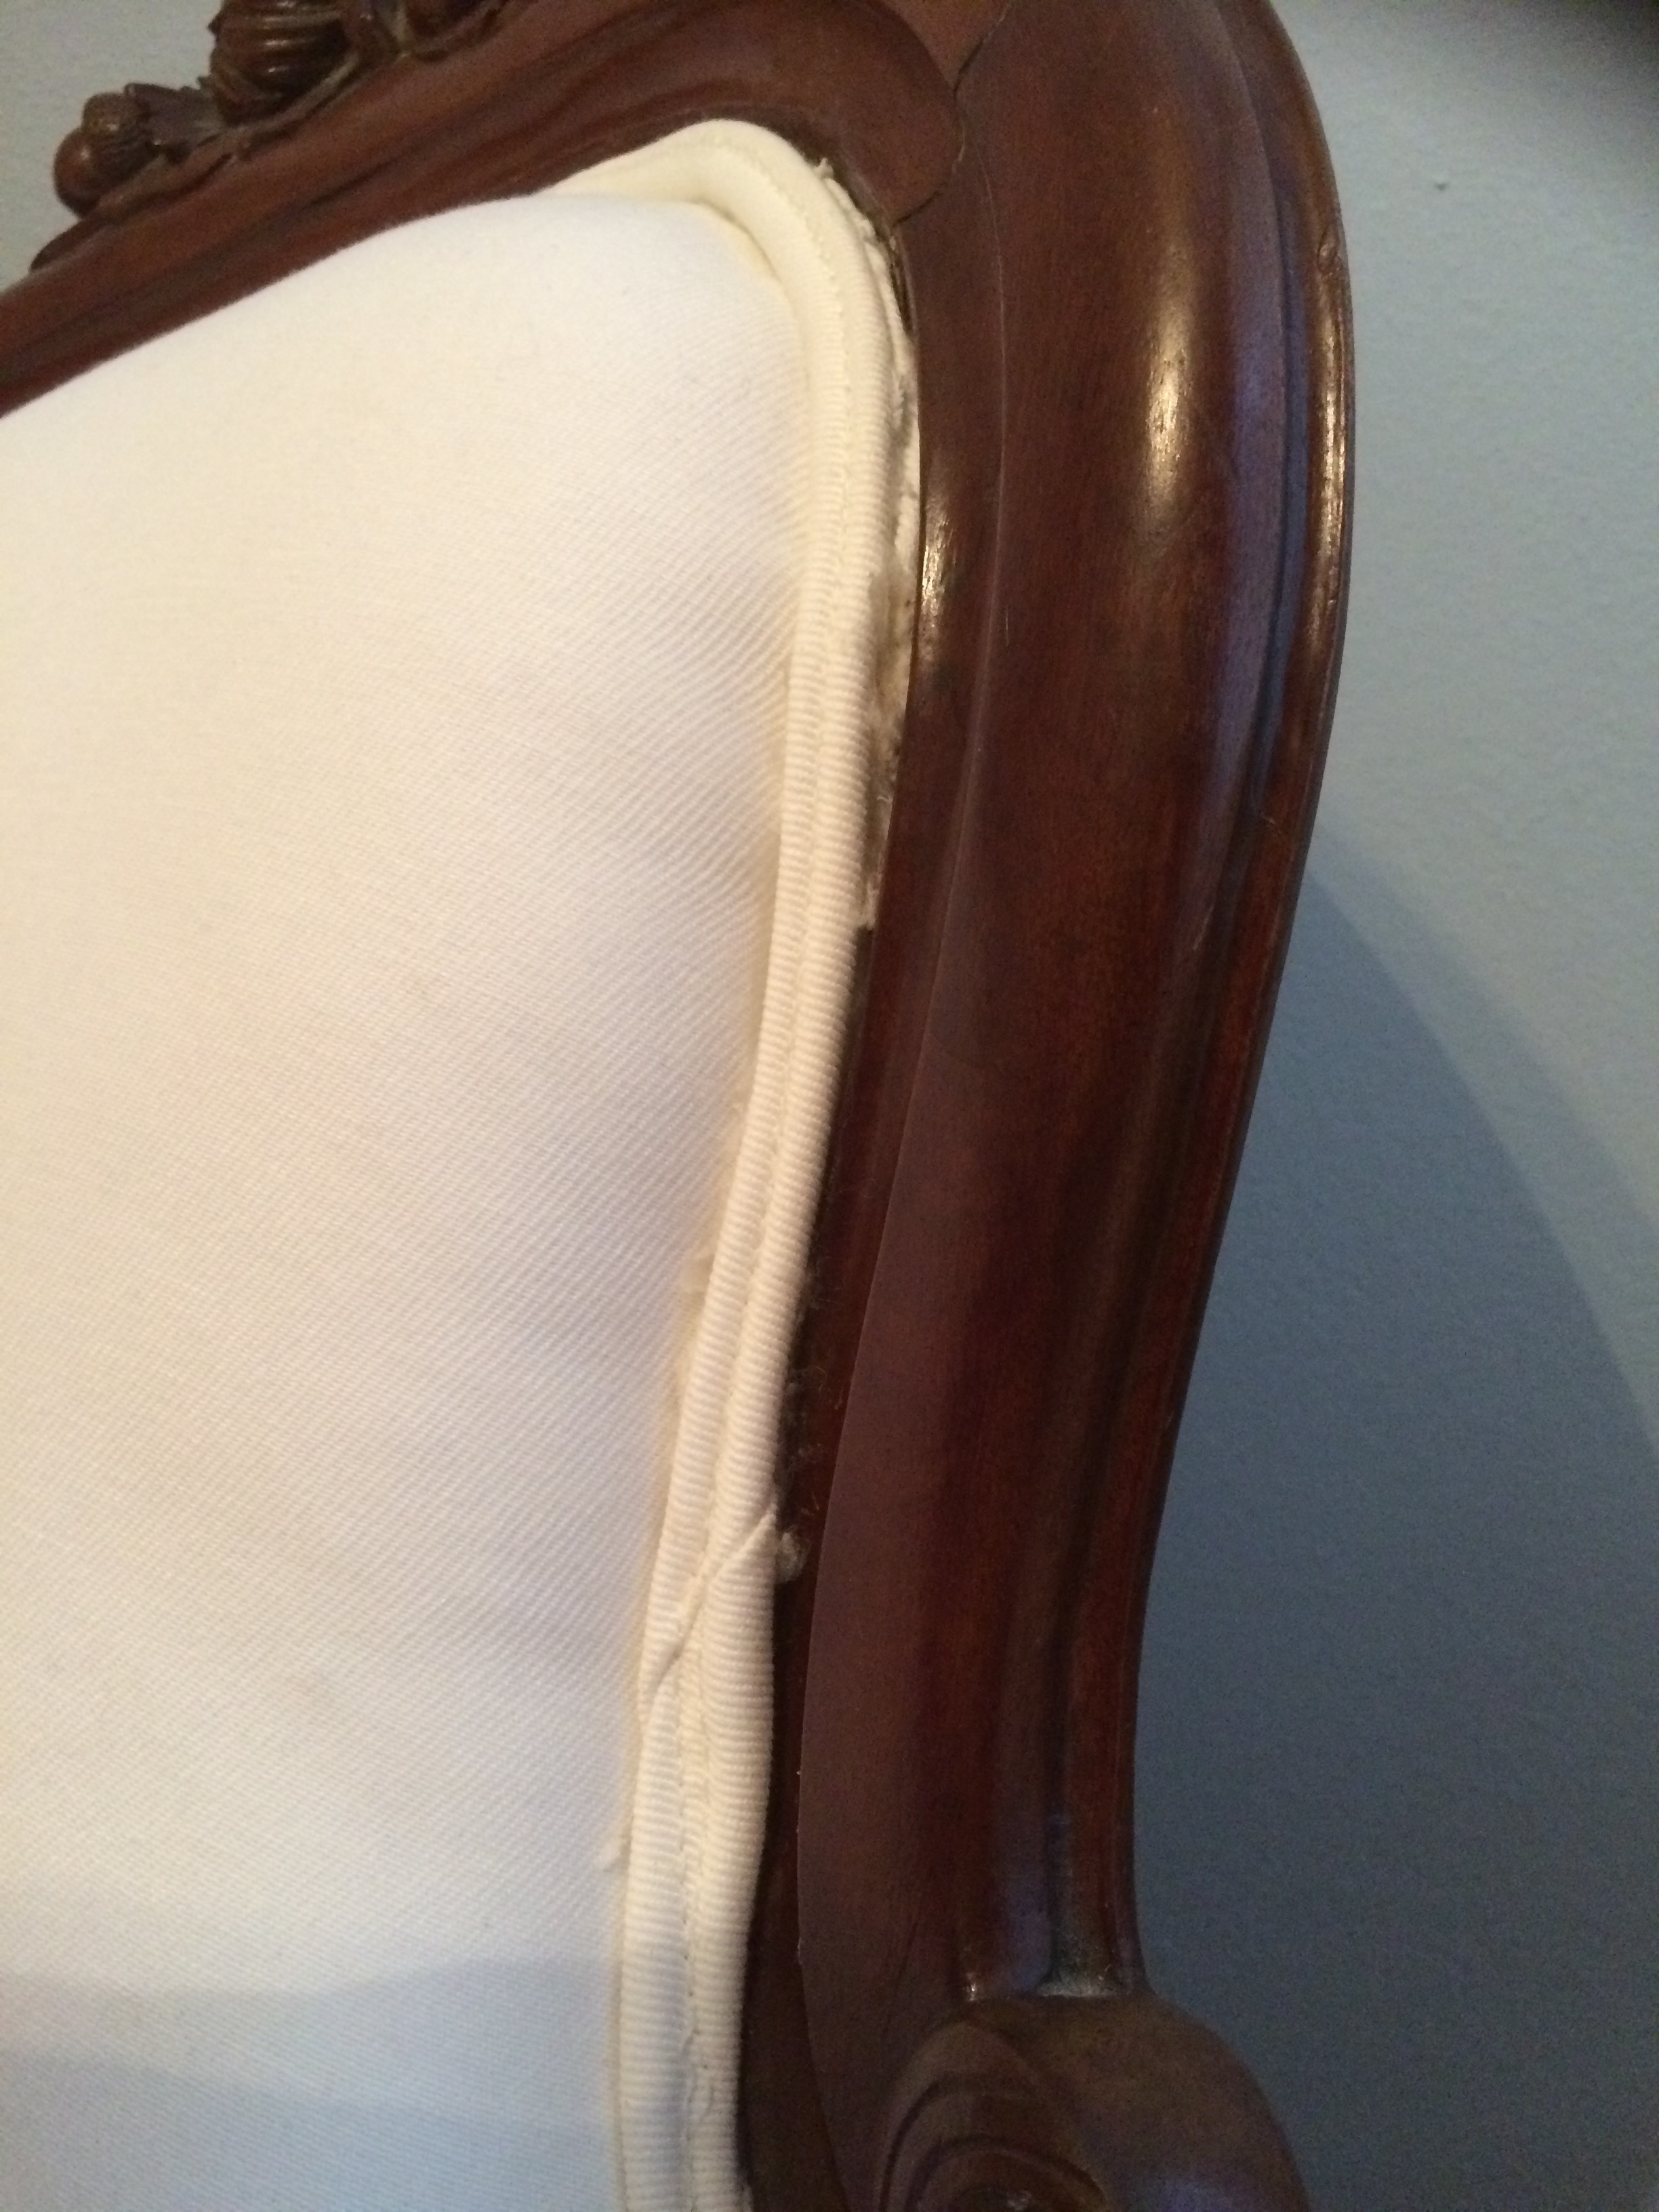 Visible globs of glue; visible fraying edge of upholstery not covered by welting. 